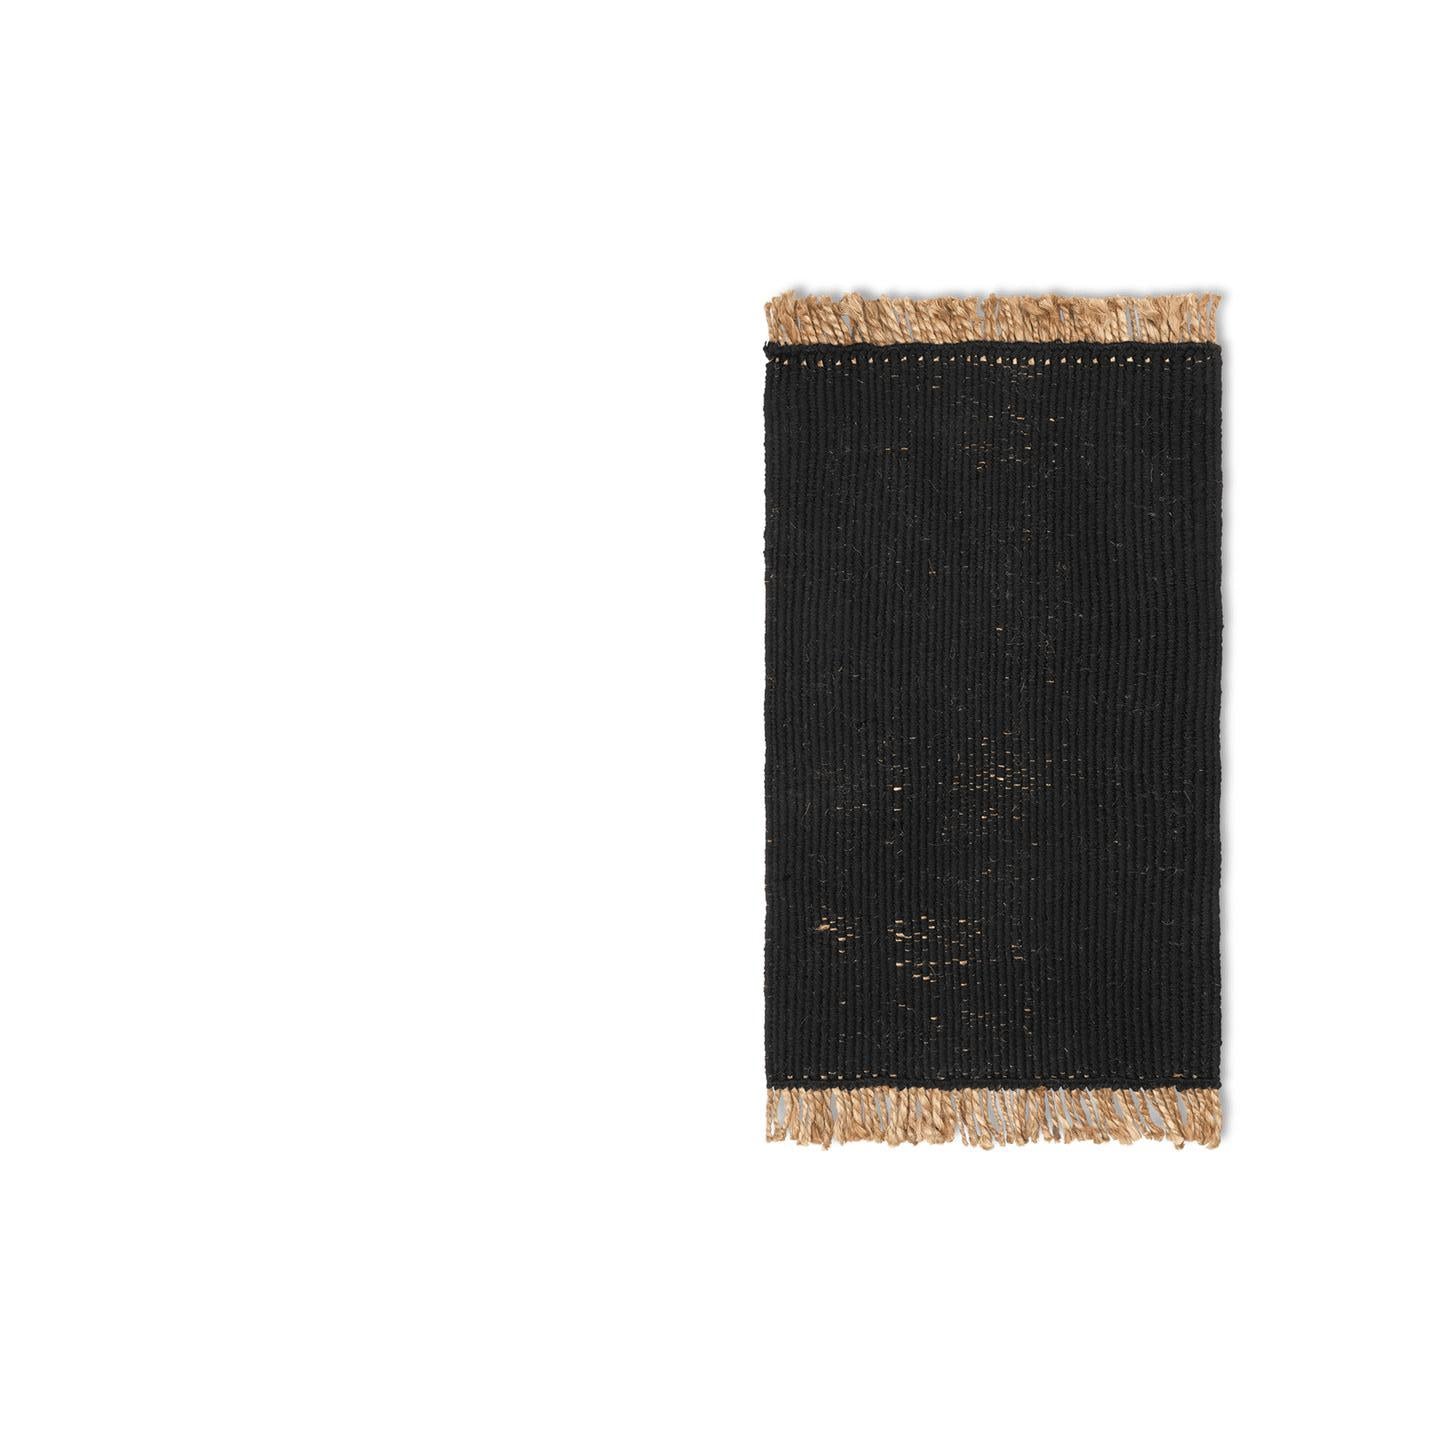 Buy 7 X 7 Round Jute Area Rugs With Fringes for Living Room ON SALE